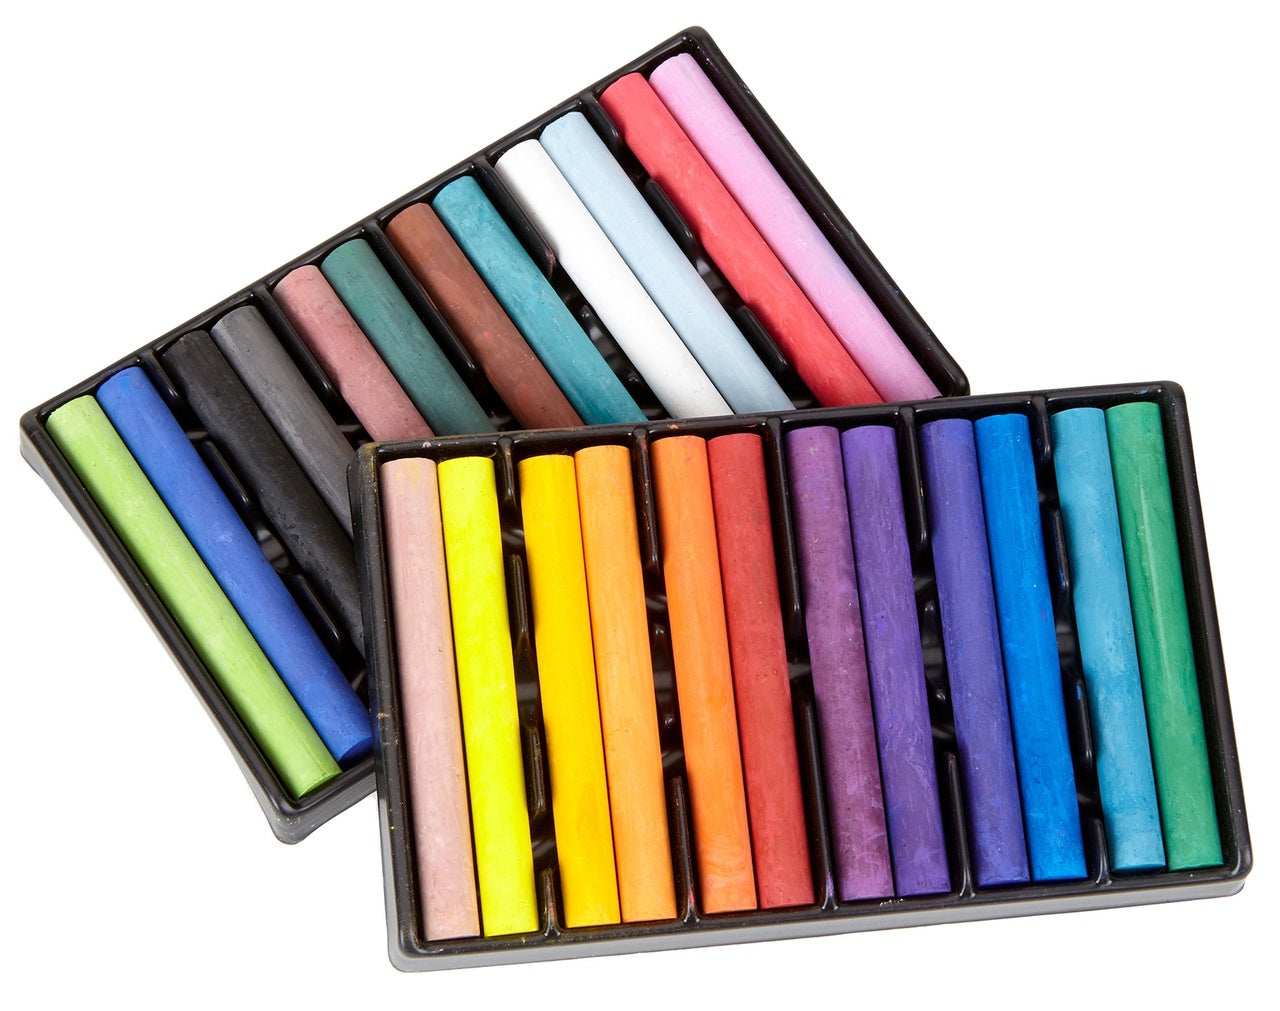 Crayola Colored Drawing Chalk - Assorted Colors, Set of 144